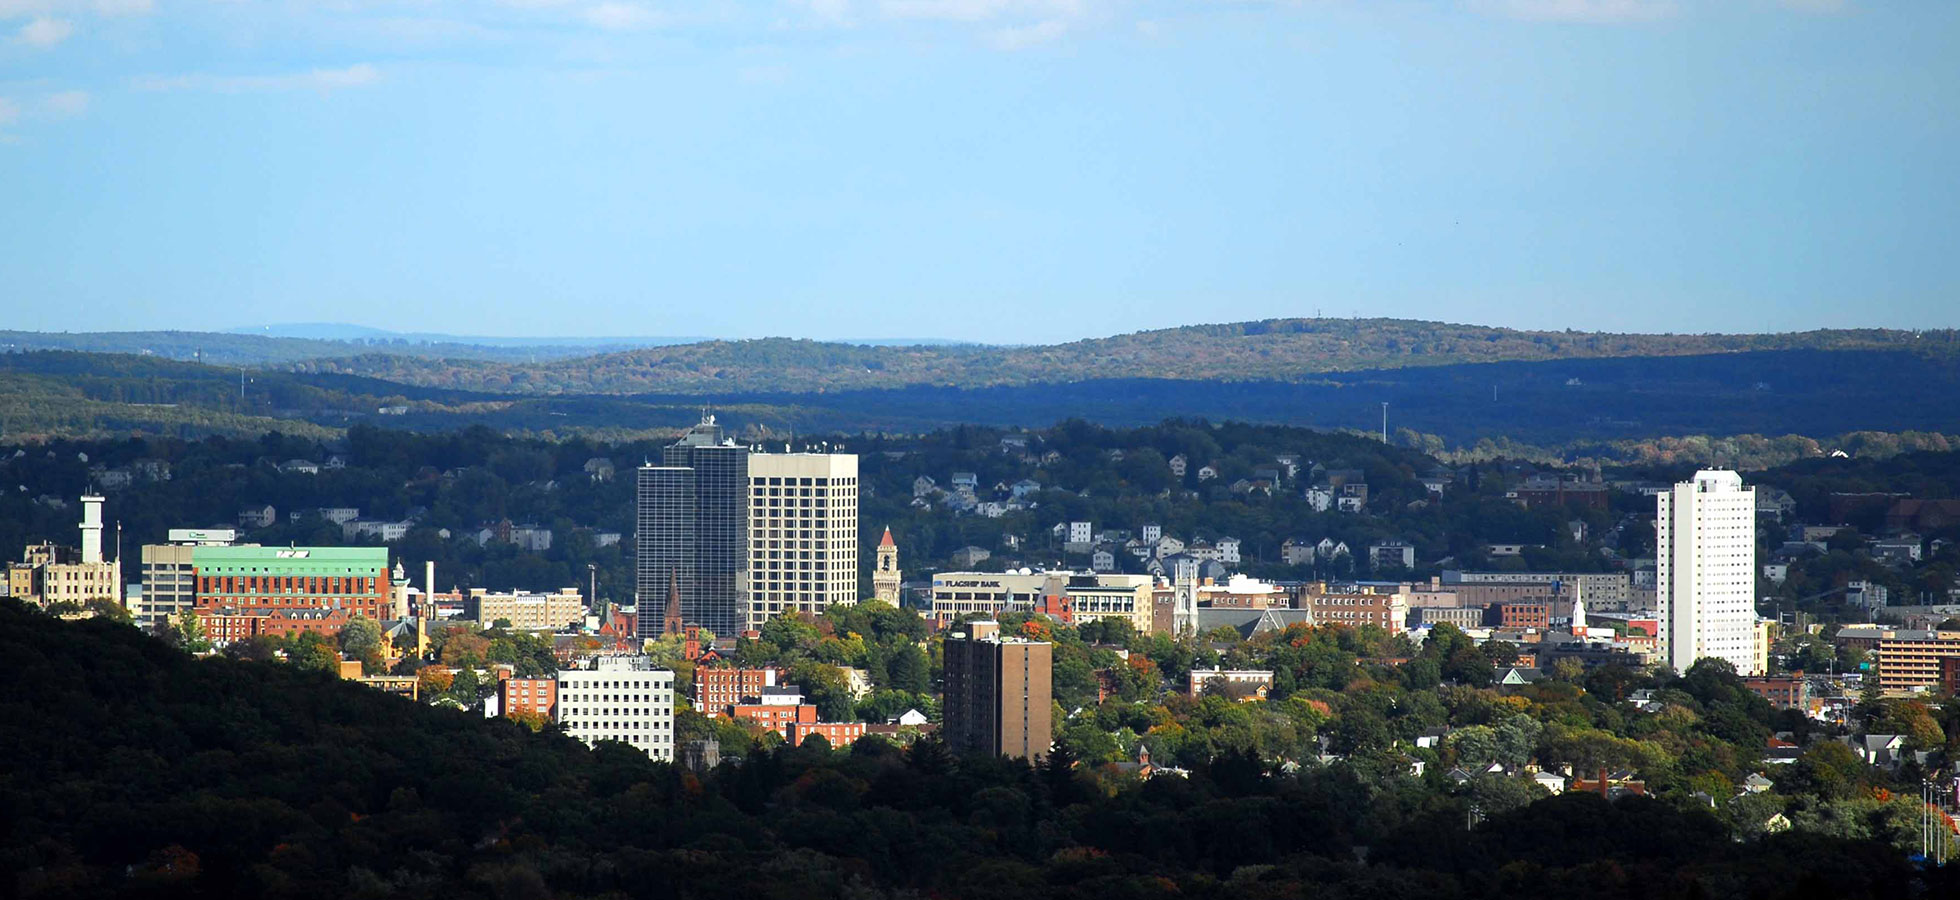 Worcester Economy Turns in Strong Third Quarter